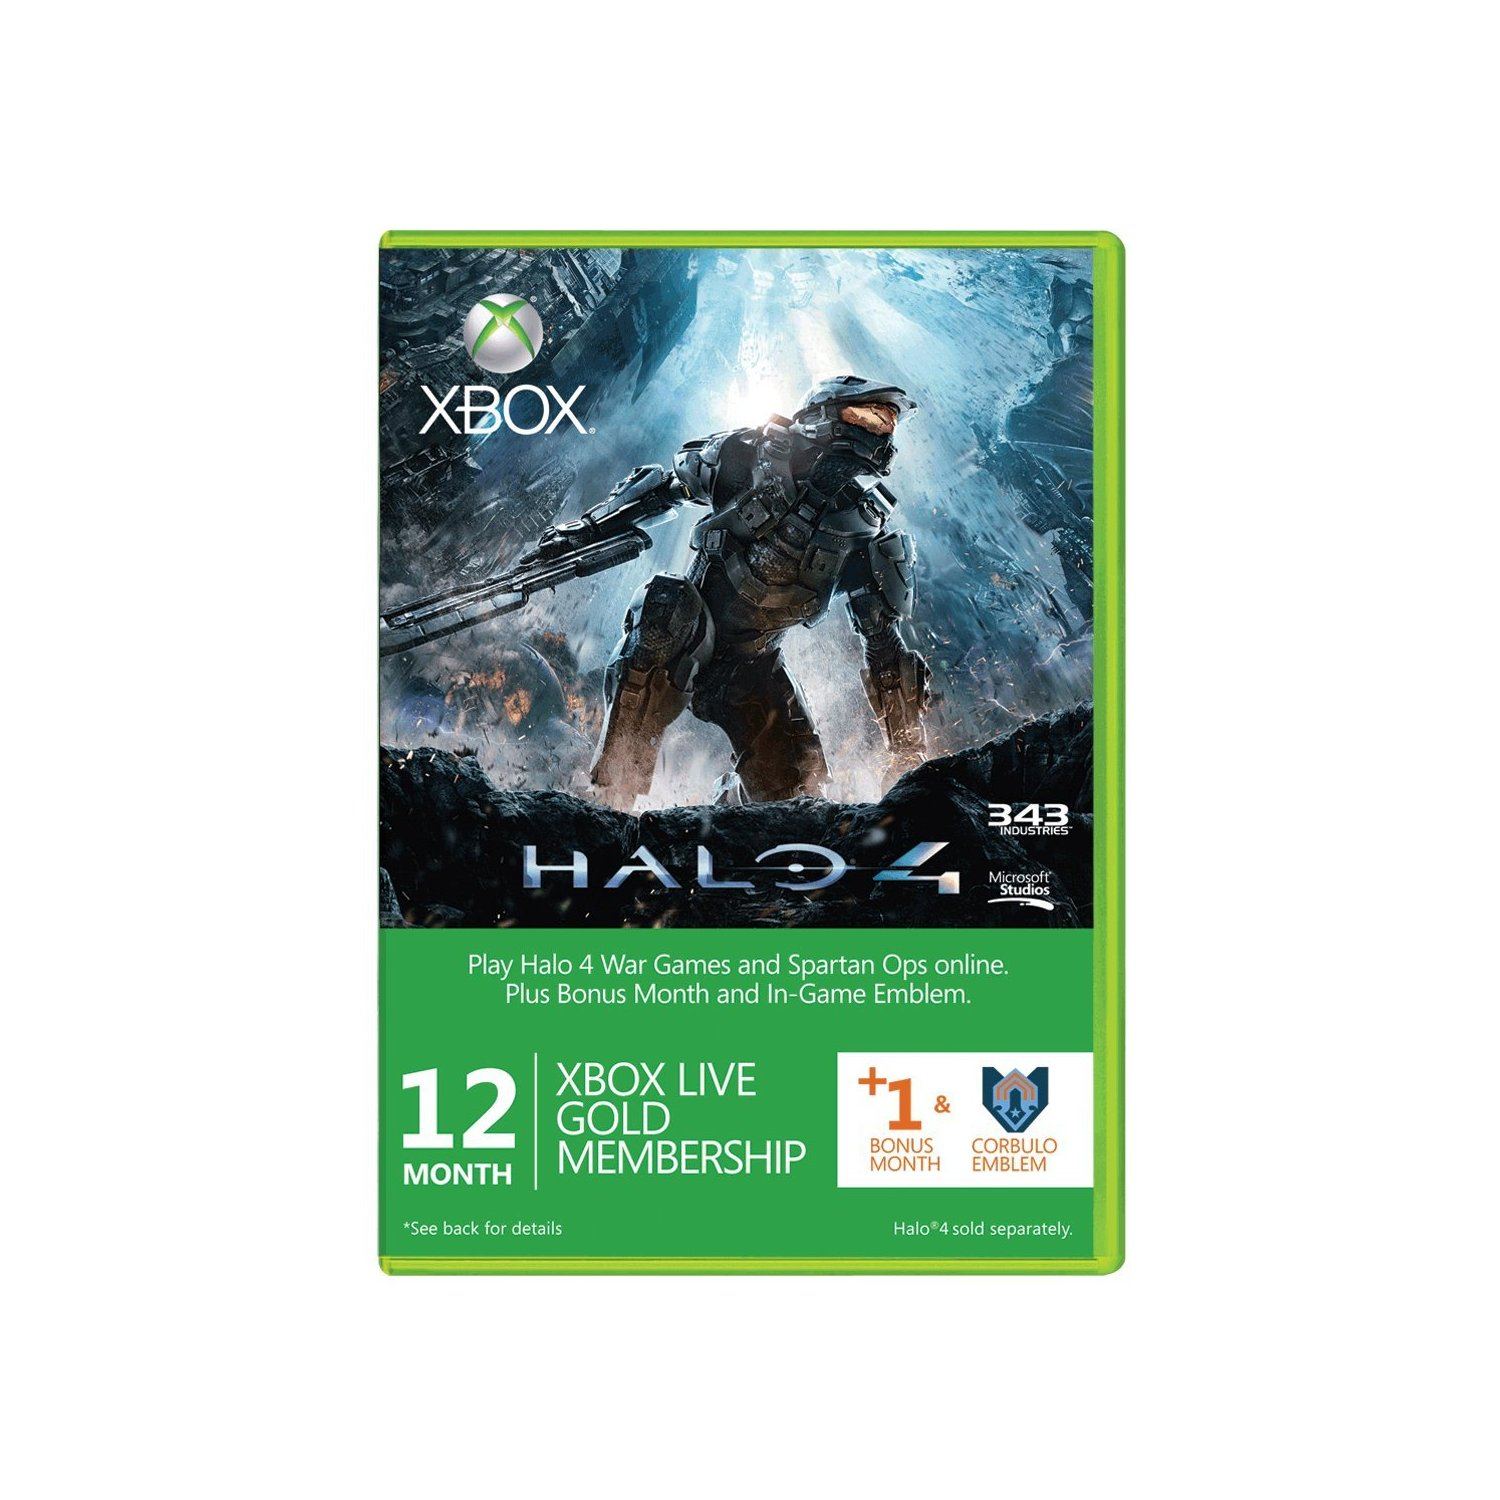 Xbox Live 12-Month + 1 Gold Membership Card (Halo 4 Edition)